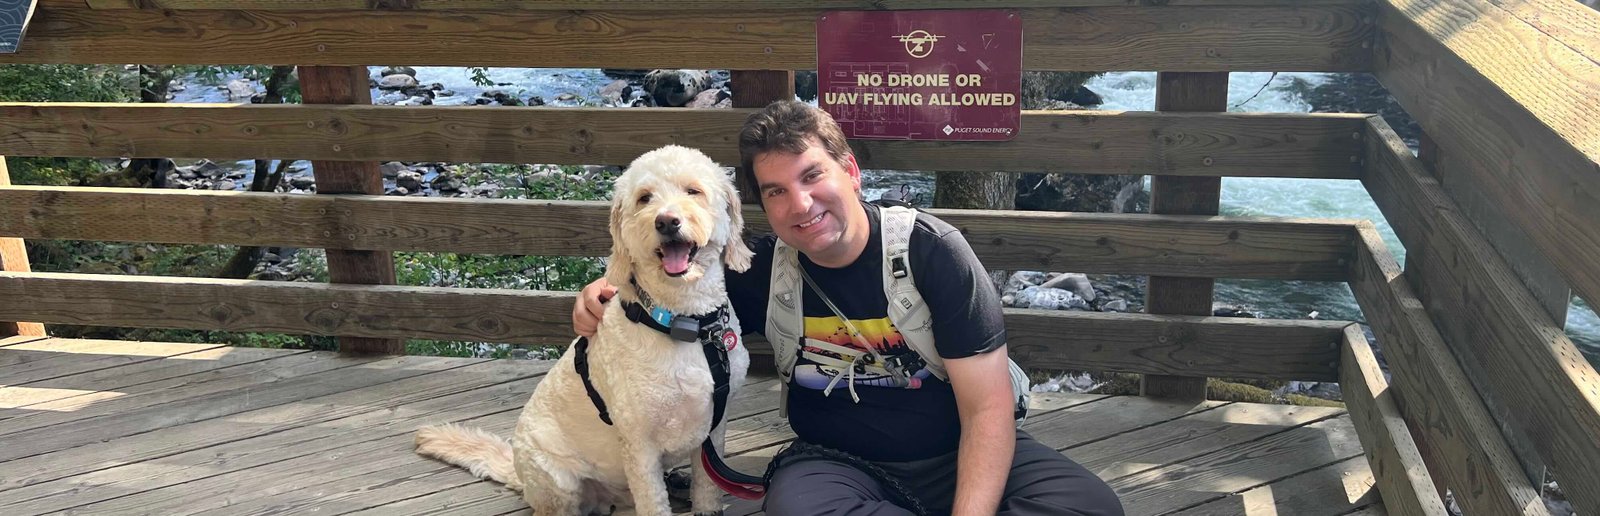 Photo of Ted with his arm around Dexter, a golden mountain doodle, with them both sitting on a boardwalk. Behind them, fastened to the railing, is a sign that reads "No Drone or UAV Flying Allowed."